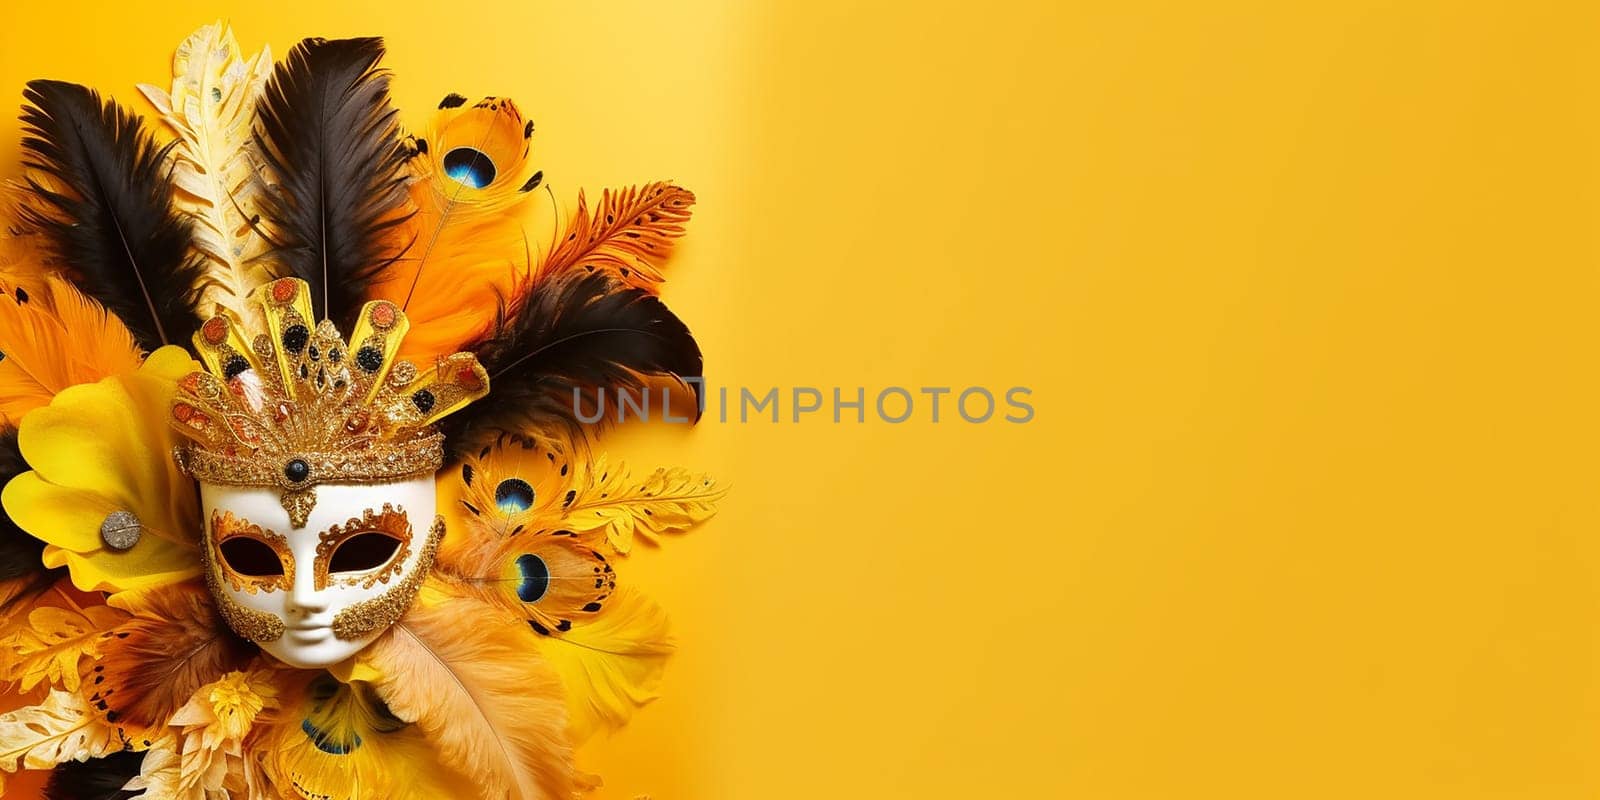 Elegant feathered mask against a vibrant yellow background.